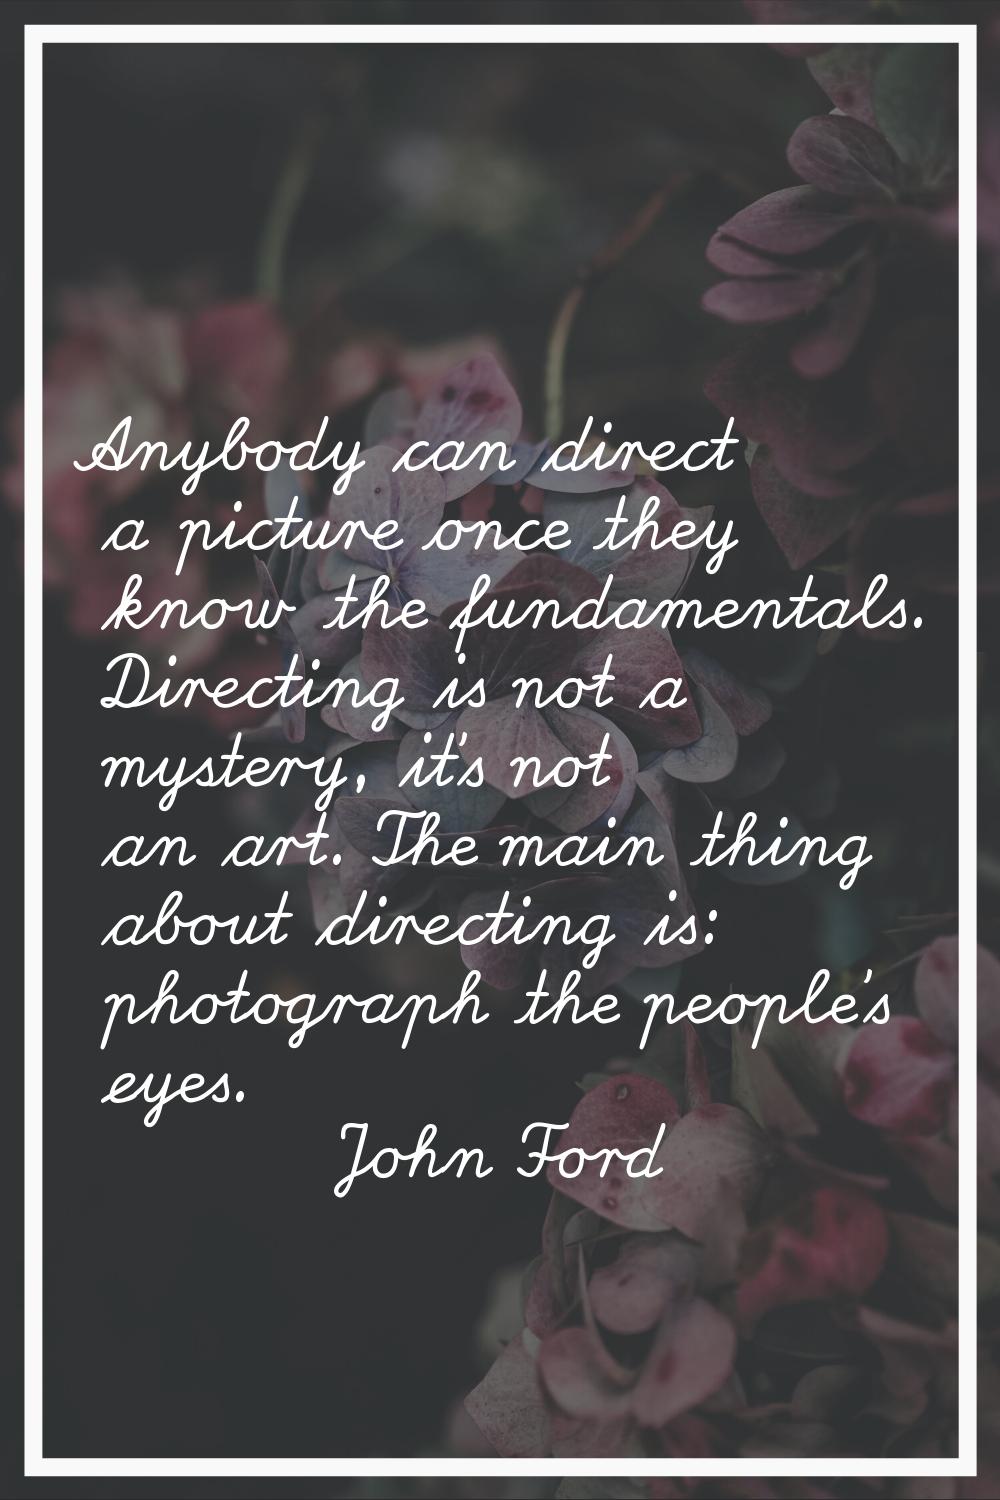 Anybody can direct a picture once they know the fundamentals. Directing is not a mystery, it's not 